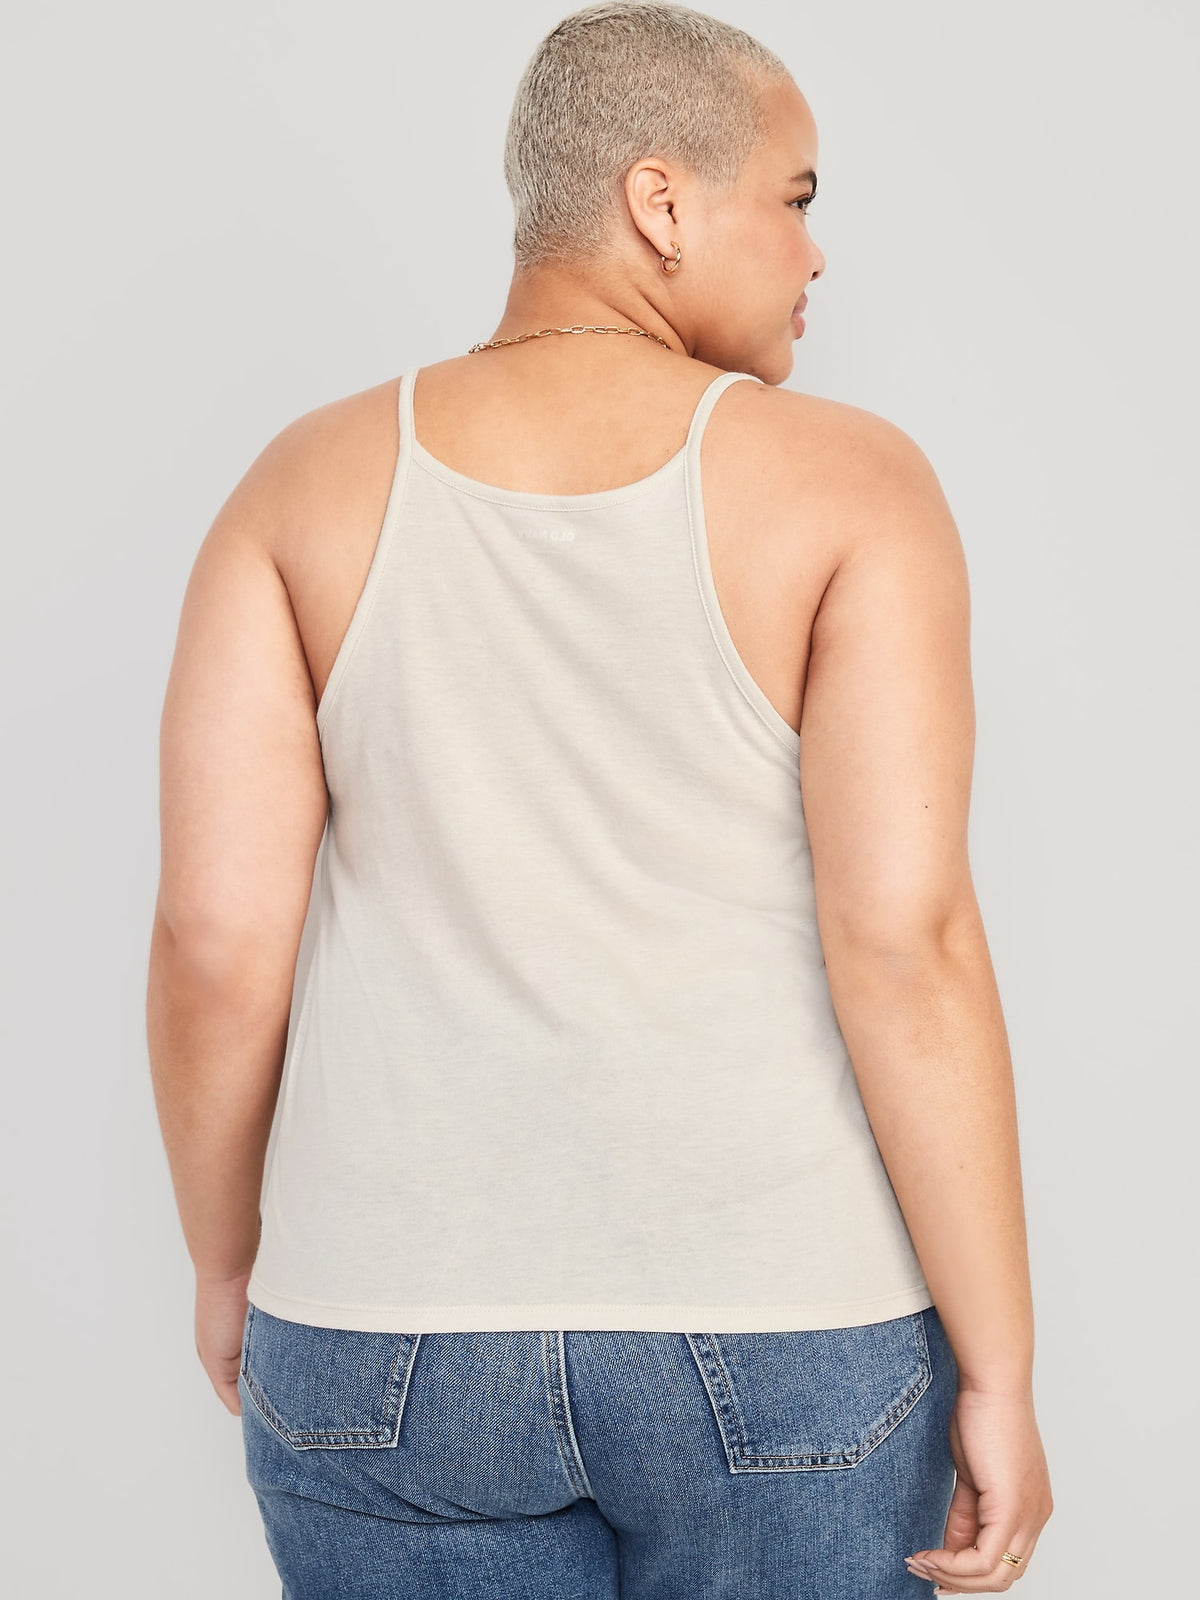 Relaxed Halter Tank Top for Women - Old Navy Philippines